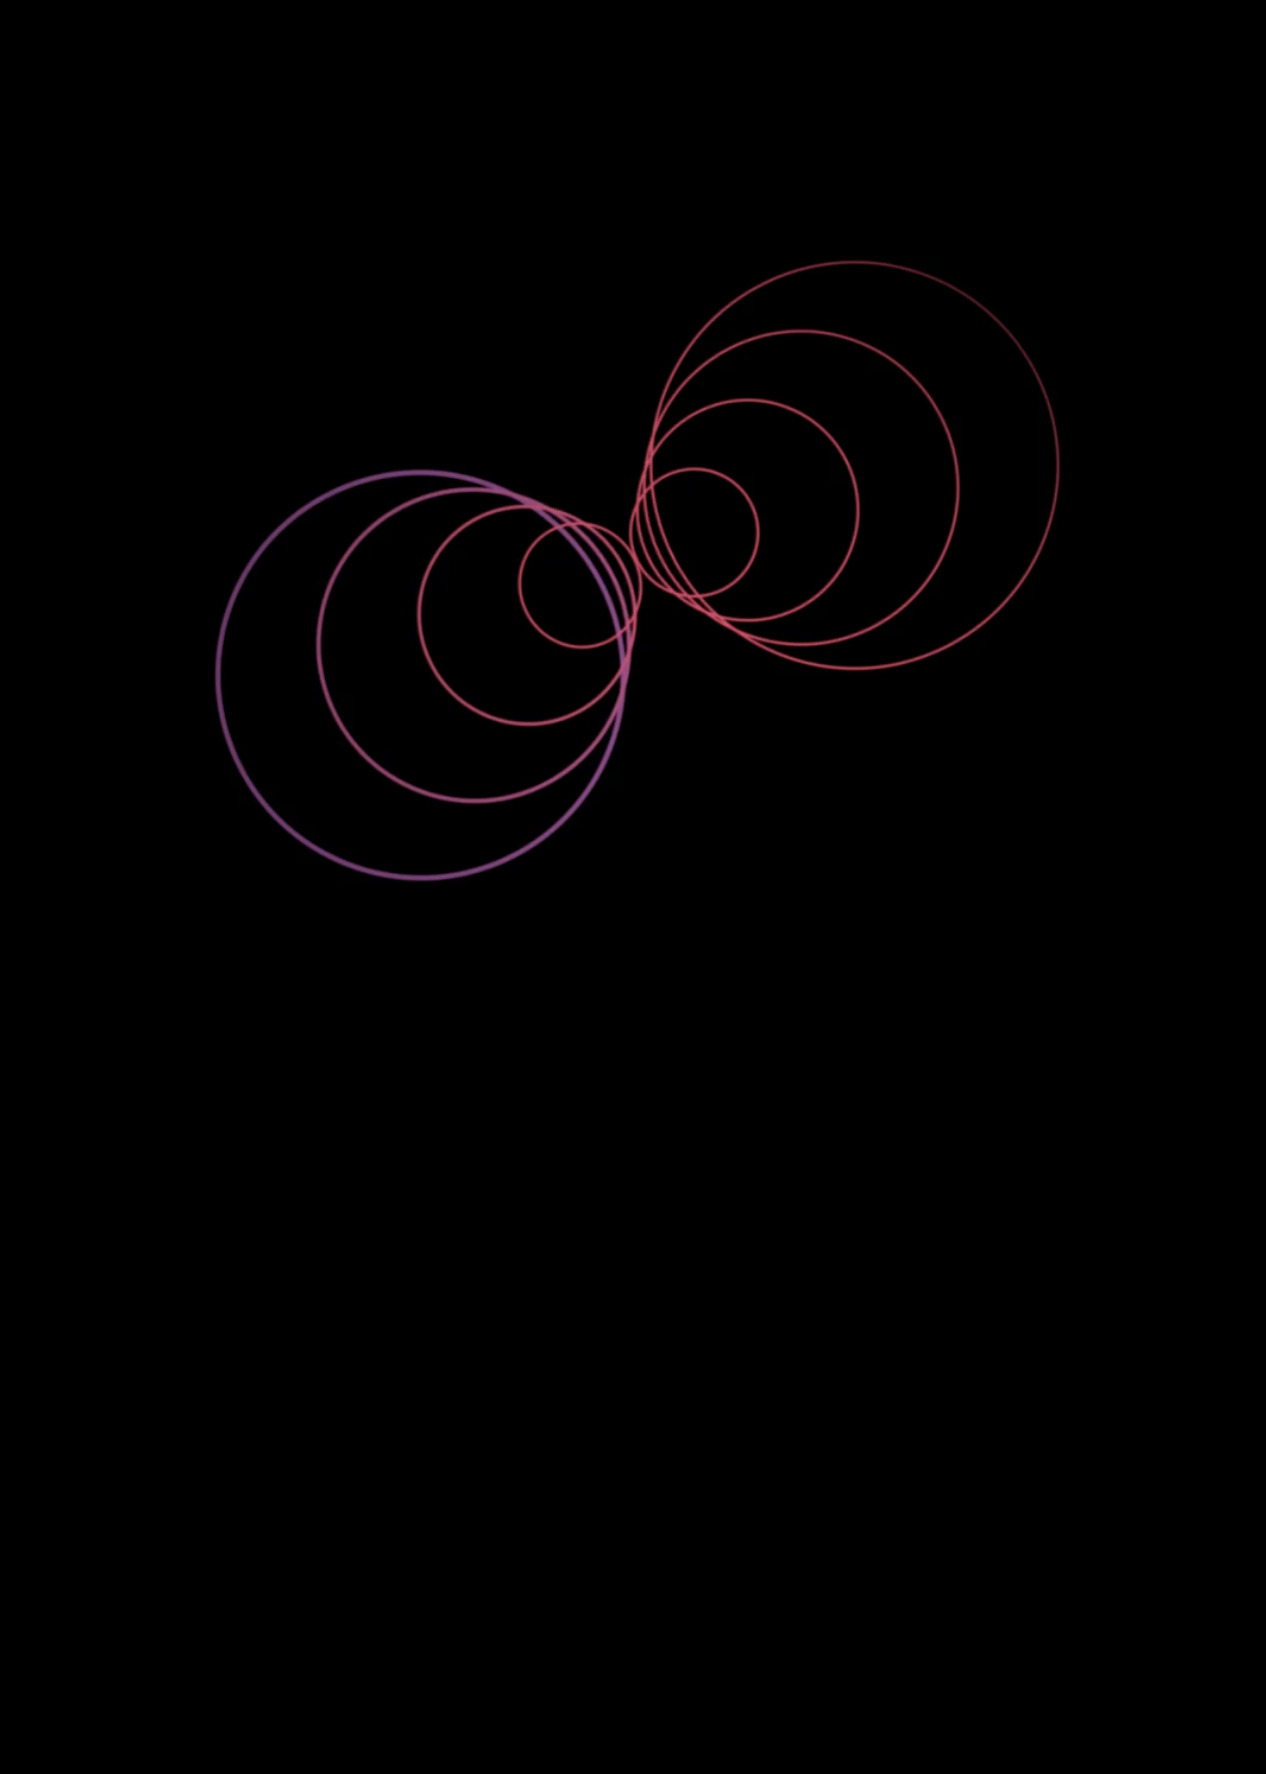 Pink and purple graphic circles on a black background